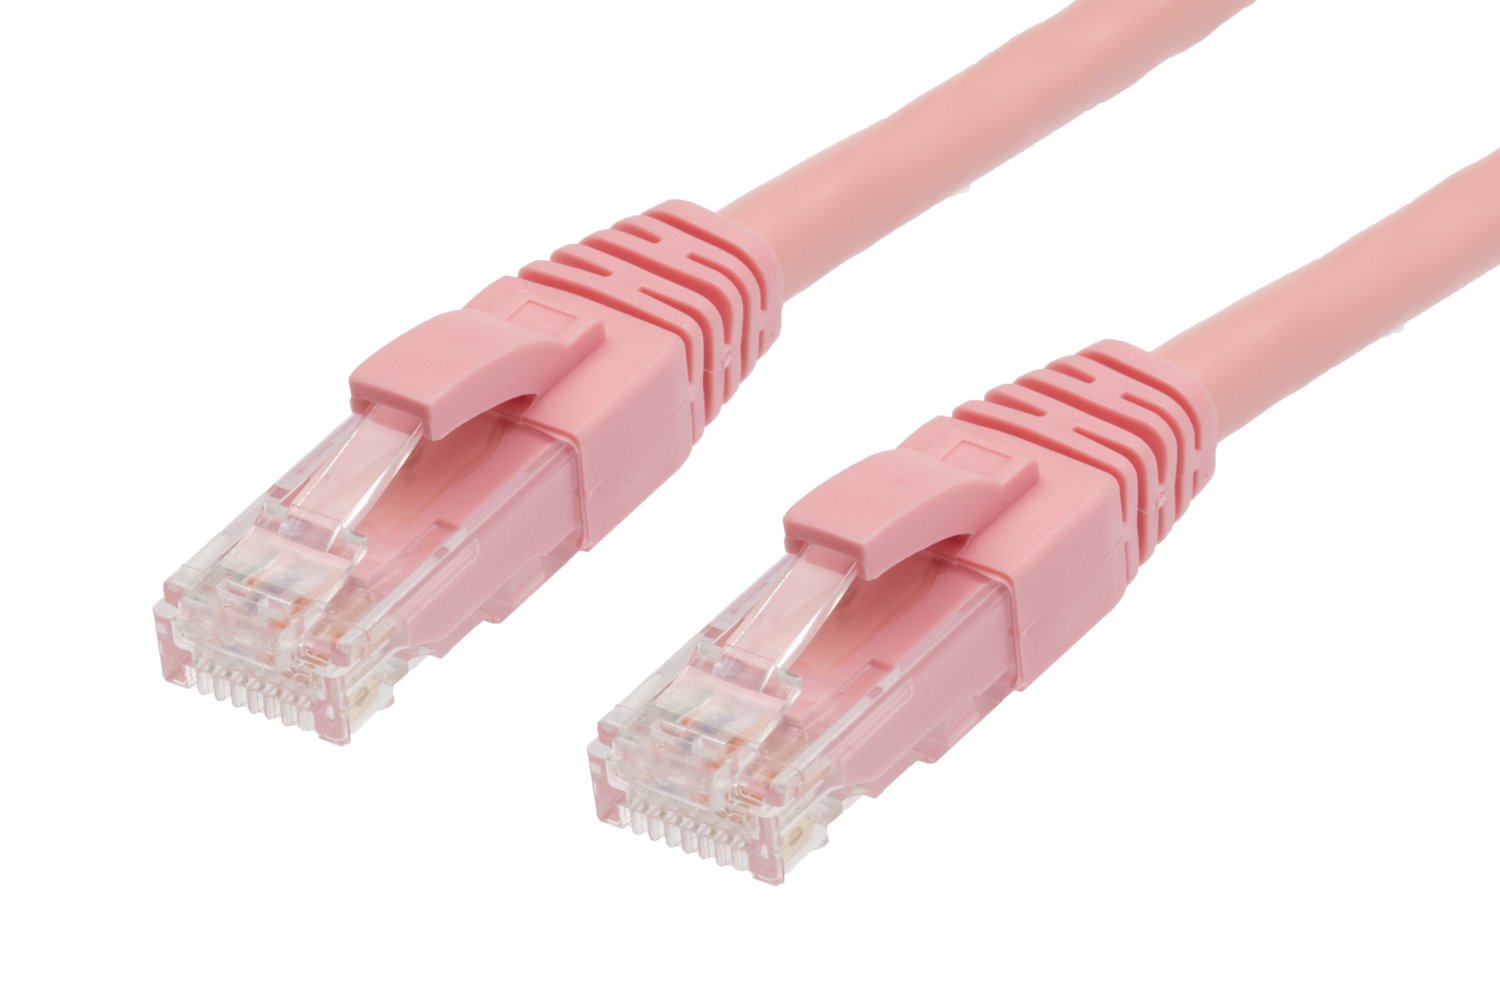 4Cabling 4M RJ45 Cat6 Ethernet Cable. Pink